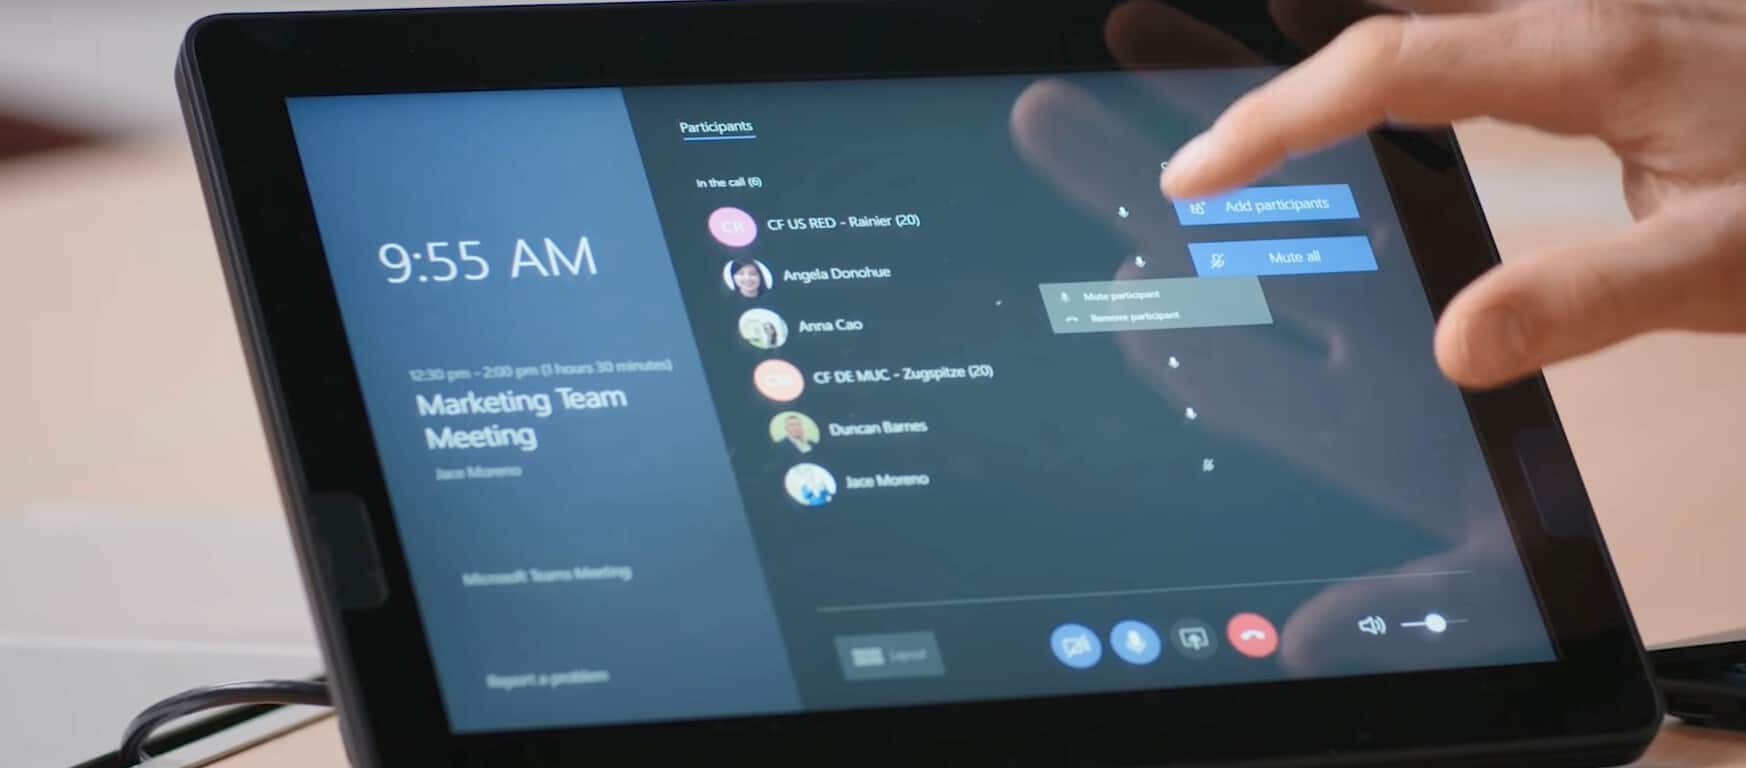 Microsoft rebrands Skype Rooms Systems as Microsoft Teams Rooms - OnMSFT.com - January 23, 2019